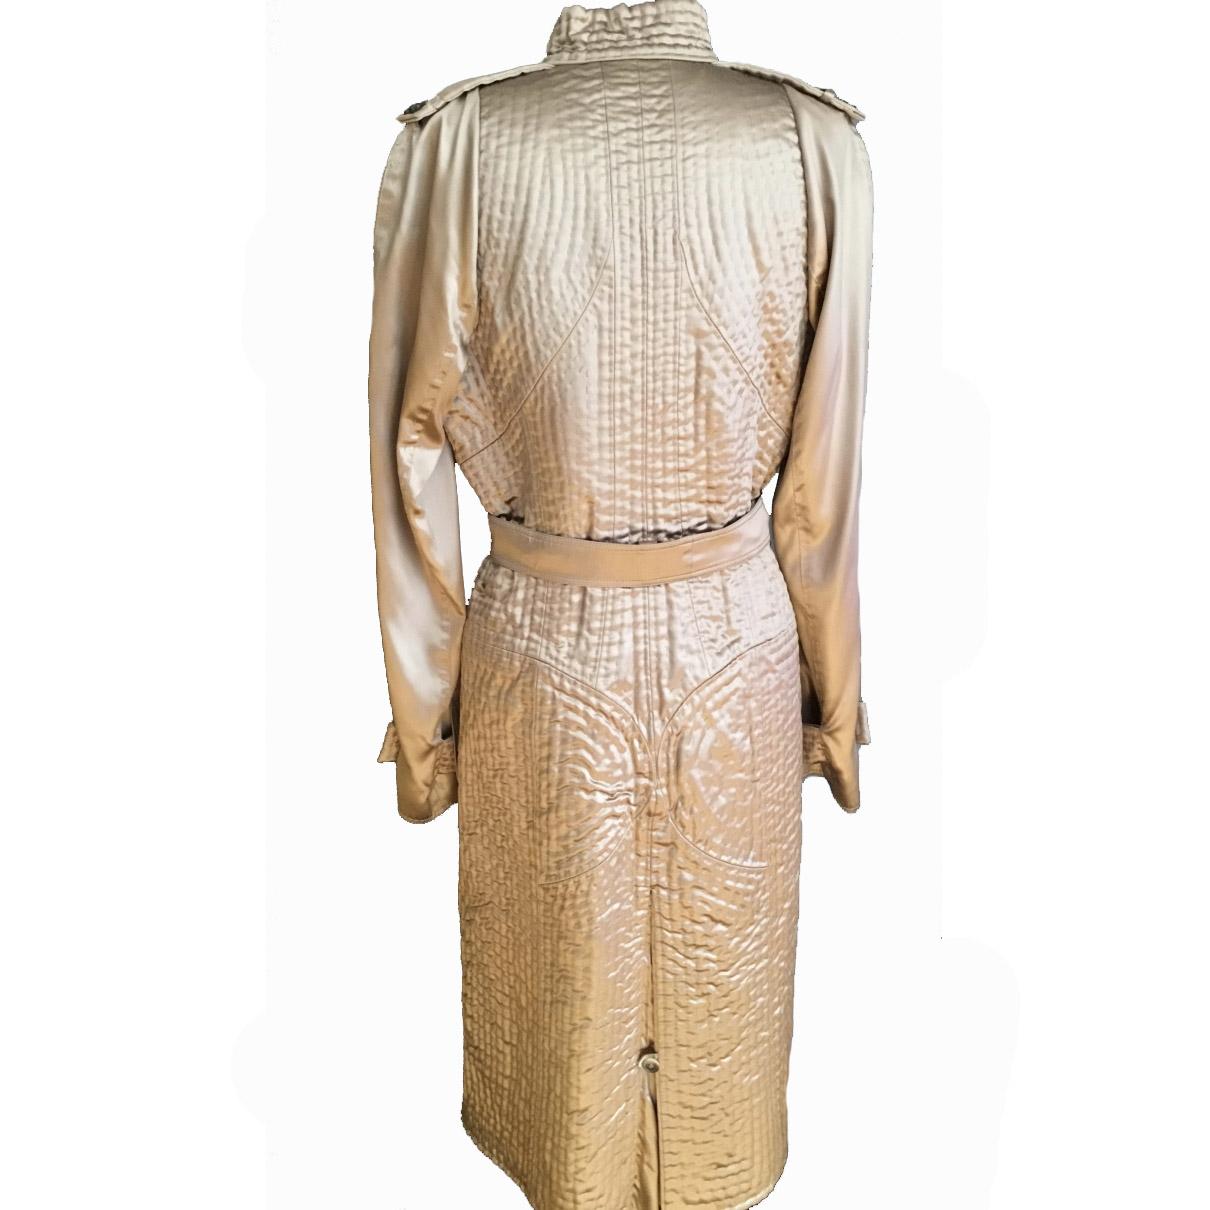 2003 Vintage 
Tom Ford for Yves Saint Laurent 

Nude Embroidered Trench Coat

FR Size 38 

Very good condition